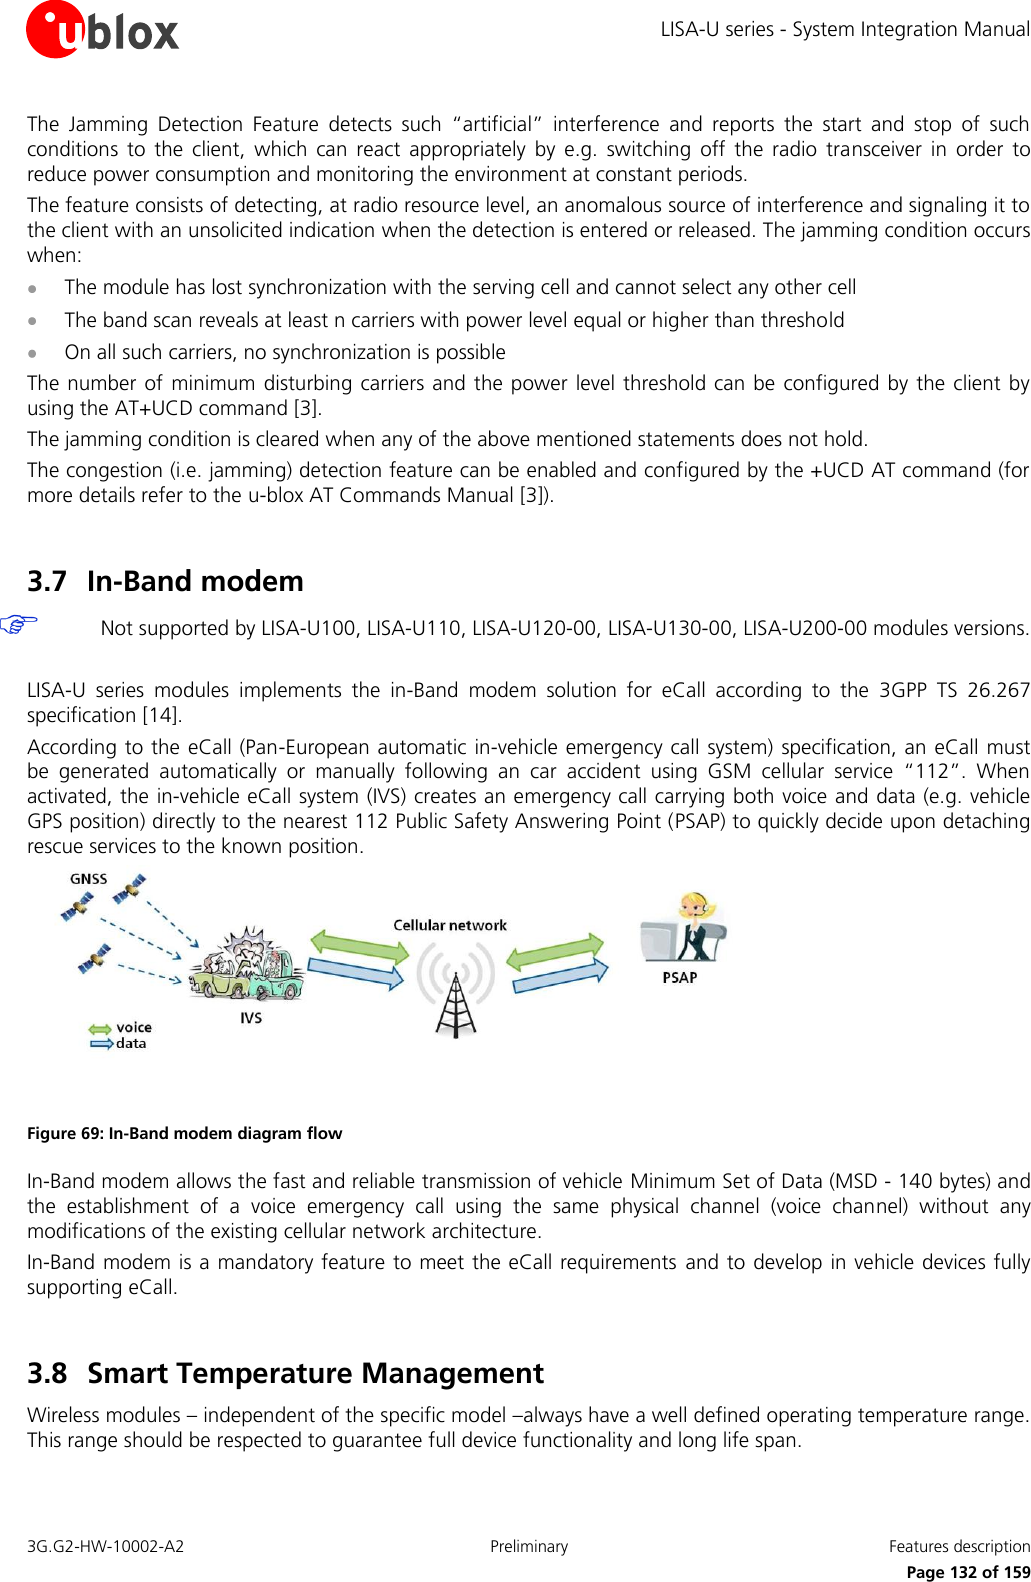 LISA-U series - System Integration Manual 3G.G2-HW-10002-A2  Preliminary  Features description      Page 132 of 159 The  Jamming  Detection  Feature  detects  such  “artificial”  interference  and  reports  the  start  and  stop  of  such conditions  to  the  client,  which  can  react  appropriately  by  e.g.  switching  off  the  radio  transceiver  in  order  to reduce power consumption and monitoring the environment at constant periods. The feature consists of detecting, at radio resource level, an anomalous source of interference and signaling it to the client with an unsolicited indication when the detection is entered or released. The jamming condition occurs when:  The module has lost synchronization with the serving cell and cannot select any other cell  The band scan reveals at least n carriers with power level equal or higher than threshold  On all such carriers, no synchronization is possible The number of  minimum disturbing carriers and the power level threshold can be configured by the client  by using the AT+UCD command [3]. The jamming condition is cleared when any of the above mentioned statements does not hold. The congestion (i.e. jamming) detection feature can be enabled and configured by the +UCD AT command (for more details refer to the u-blox AT Commands Manual [3]).  3.7 In-Band modem  Not supported by LISA-U100, LISA-U110, LISA-U120-00, LISA-U130-00, LISA-U200-00 modules versions.  LISA-U  series  modules  implements  the  in-Band  modem  solution  for  eCall  according  to  the  3GPP  TS  26.267 specification [14]. According to the eCall (Pan-European automatic in-vehicle emergency call system)  specification, an eCall must be  generated  automatically  or  manually  following  an  car  accident  using  GSM  cellular  service  “112”.  When activated, the in-vehicle eCall system (IVS) creates an emergency call carrying both voice and data (e.g. vehicle GPS position) directly to the nearest 112 Public Safety Answering Point (PSAP) to quickly decide upon detaching rescue services to the known position.  Figure 69: In-Band modem diagram flow In-Band modem allows the fast and reliable transmission of vehicle Minimum Set of Data (MSD - 140 bytes) and the  establishment  of  a  voice  emergency  call  using  the  same  physical  channel  (voice  channel)  without  any modifications of the existing cellular network architecture. In-Band modem is a mandatory feature to meet the eCall requirements and to  develop in vehicle devices fully supporting eCall.  3.8 Smart Temperature Management  Wireless modules – independent of the specific model –always have a well defined operating temperature range. This range should be respected to guarantee full device functionality and long life span. 